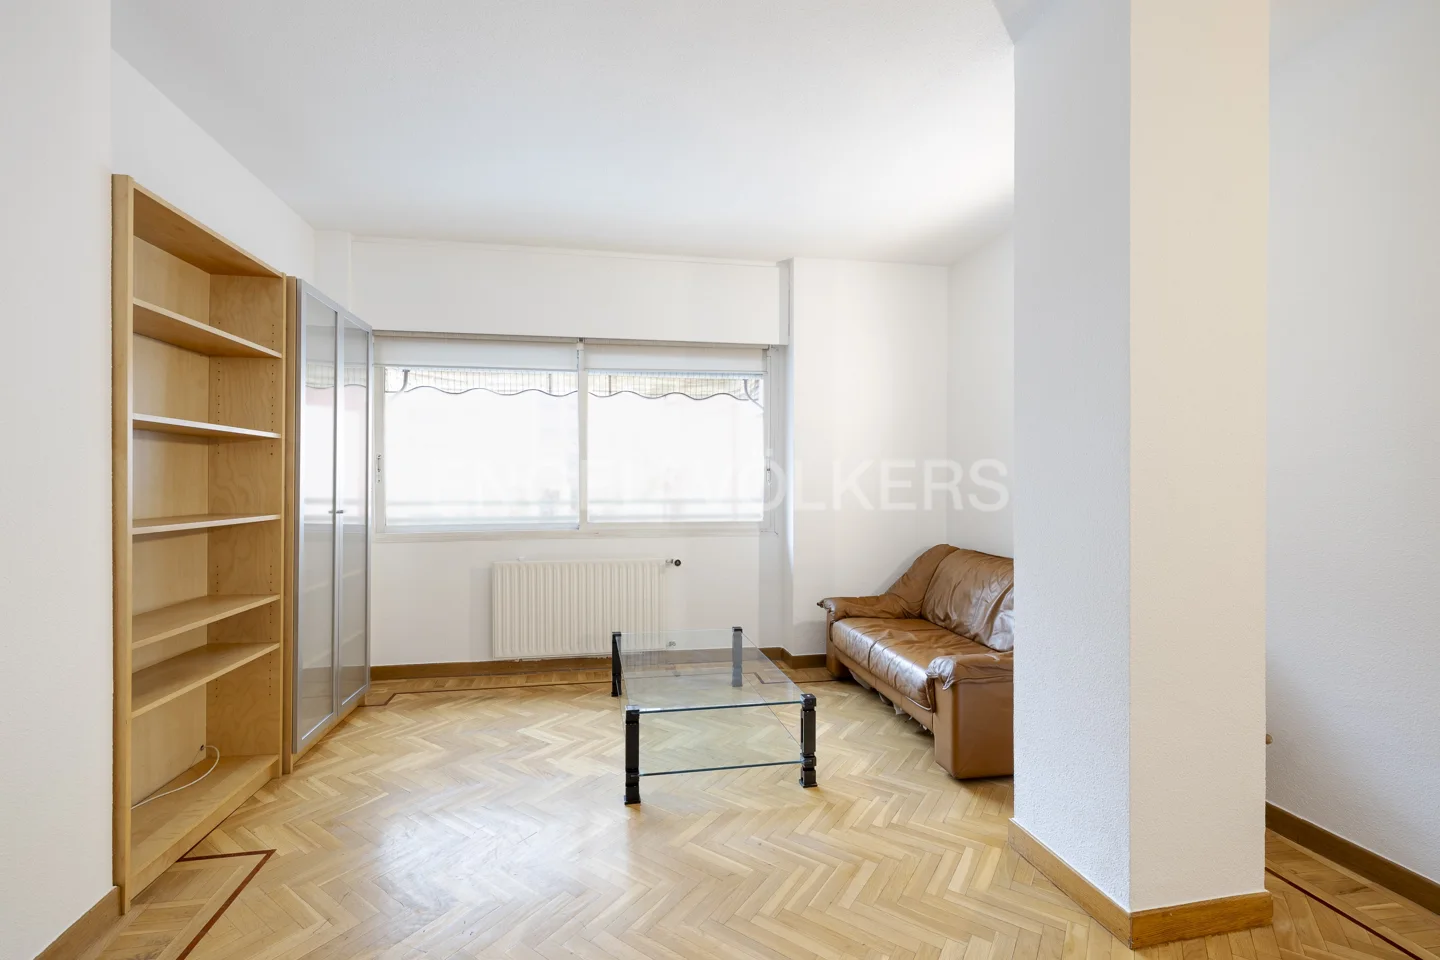 Flat with parking and storage in Téllez